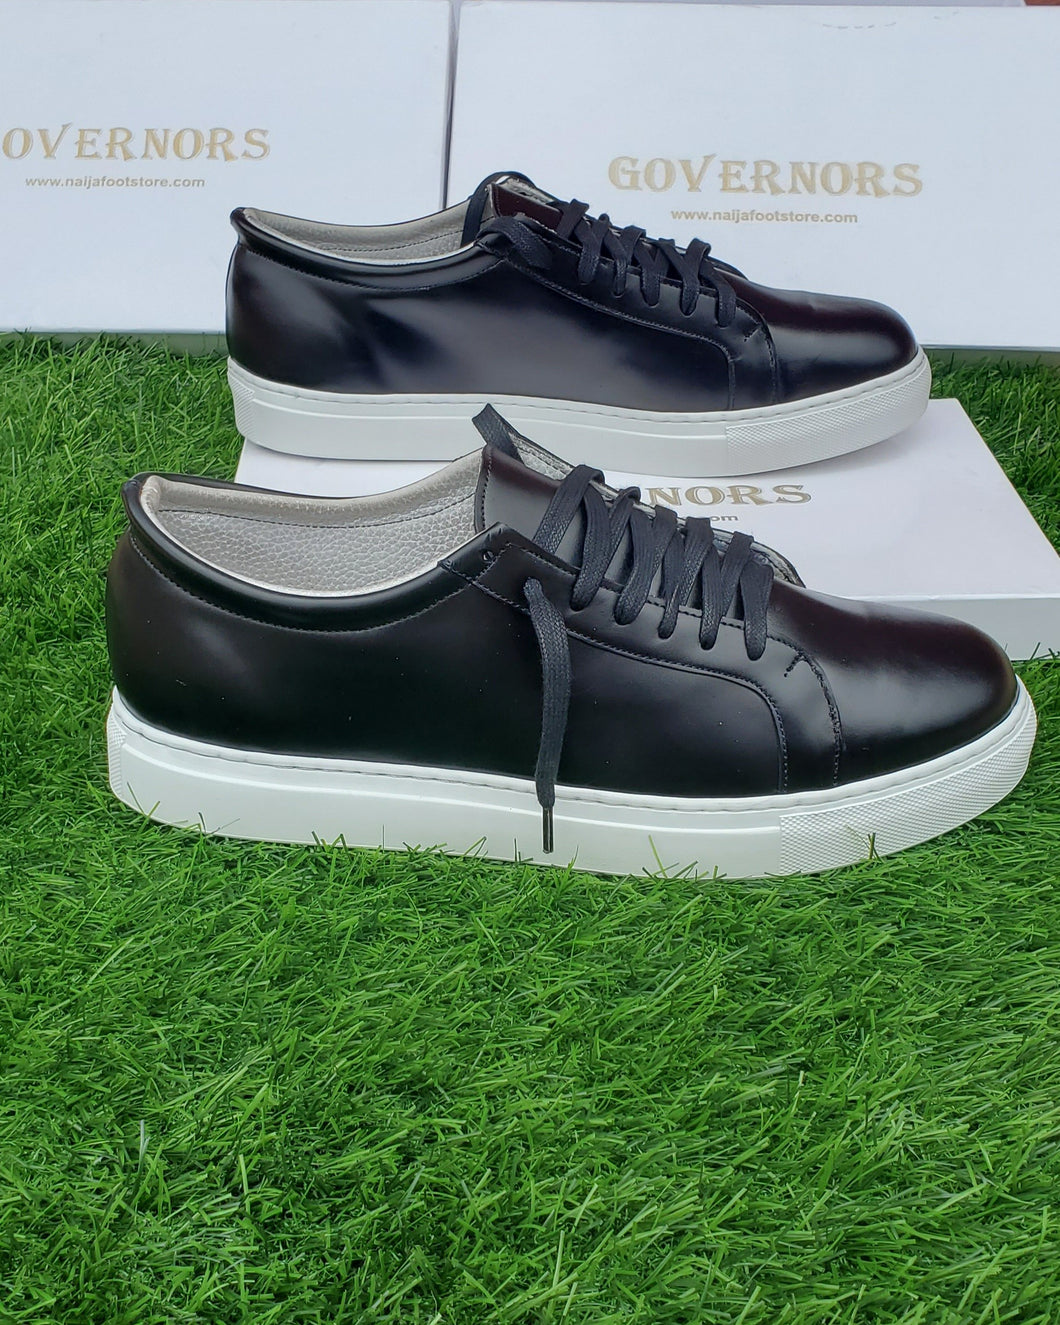 Governors Casmara Pure Leather Lace Up Sneakers